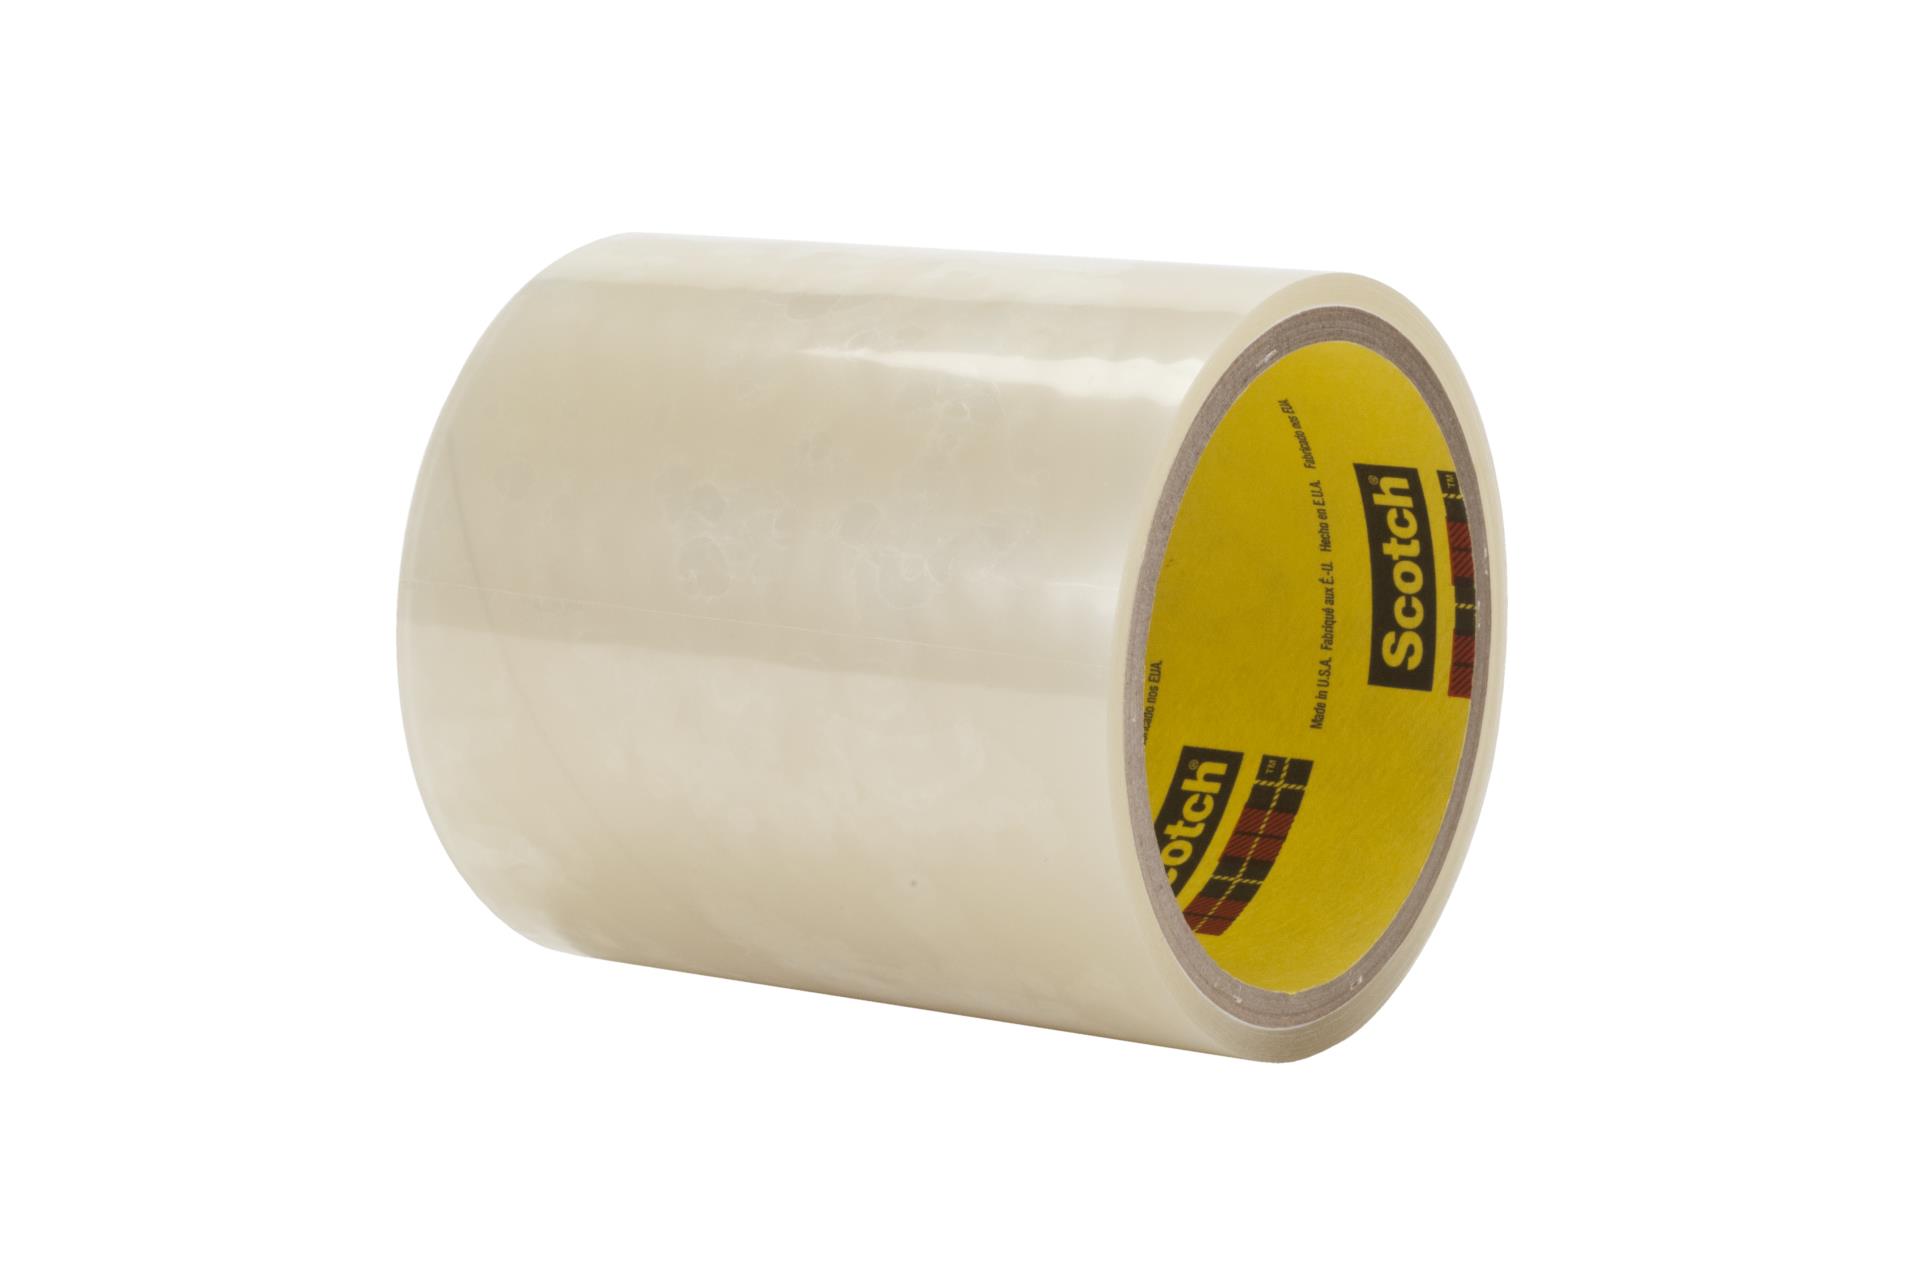 24 ROLLS 3M SCOTCH 75mm x 132 m 'DOUBLE LENGTH' CLEAR PACKING TAPE 